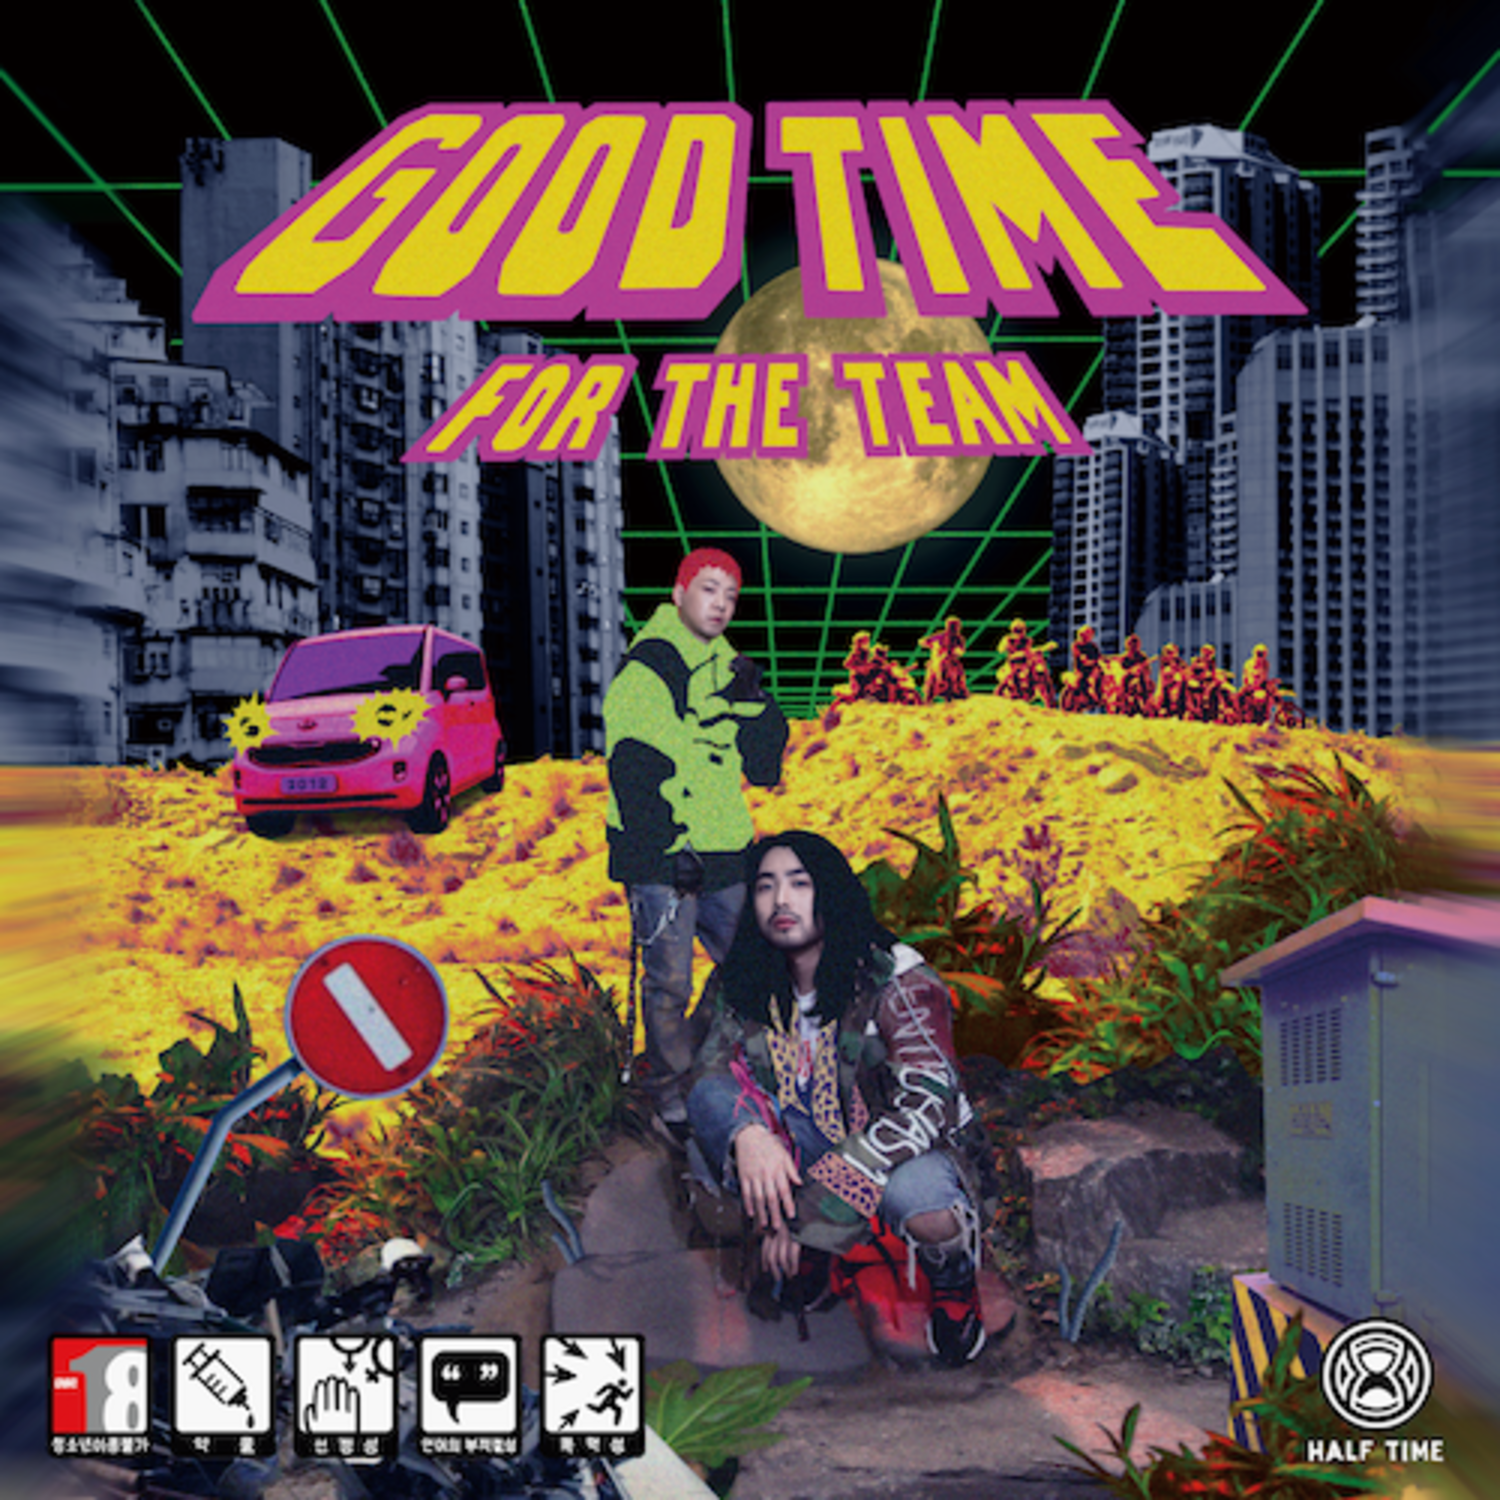 LIL BOI X TAKEONE - [GOOD TIME FOR THE TEAM] (2CD)